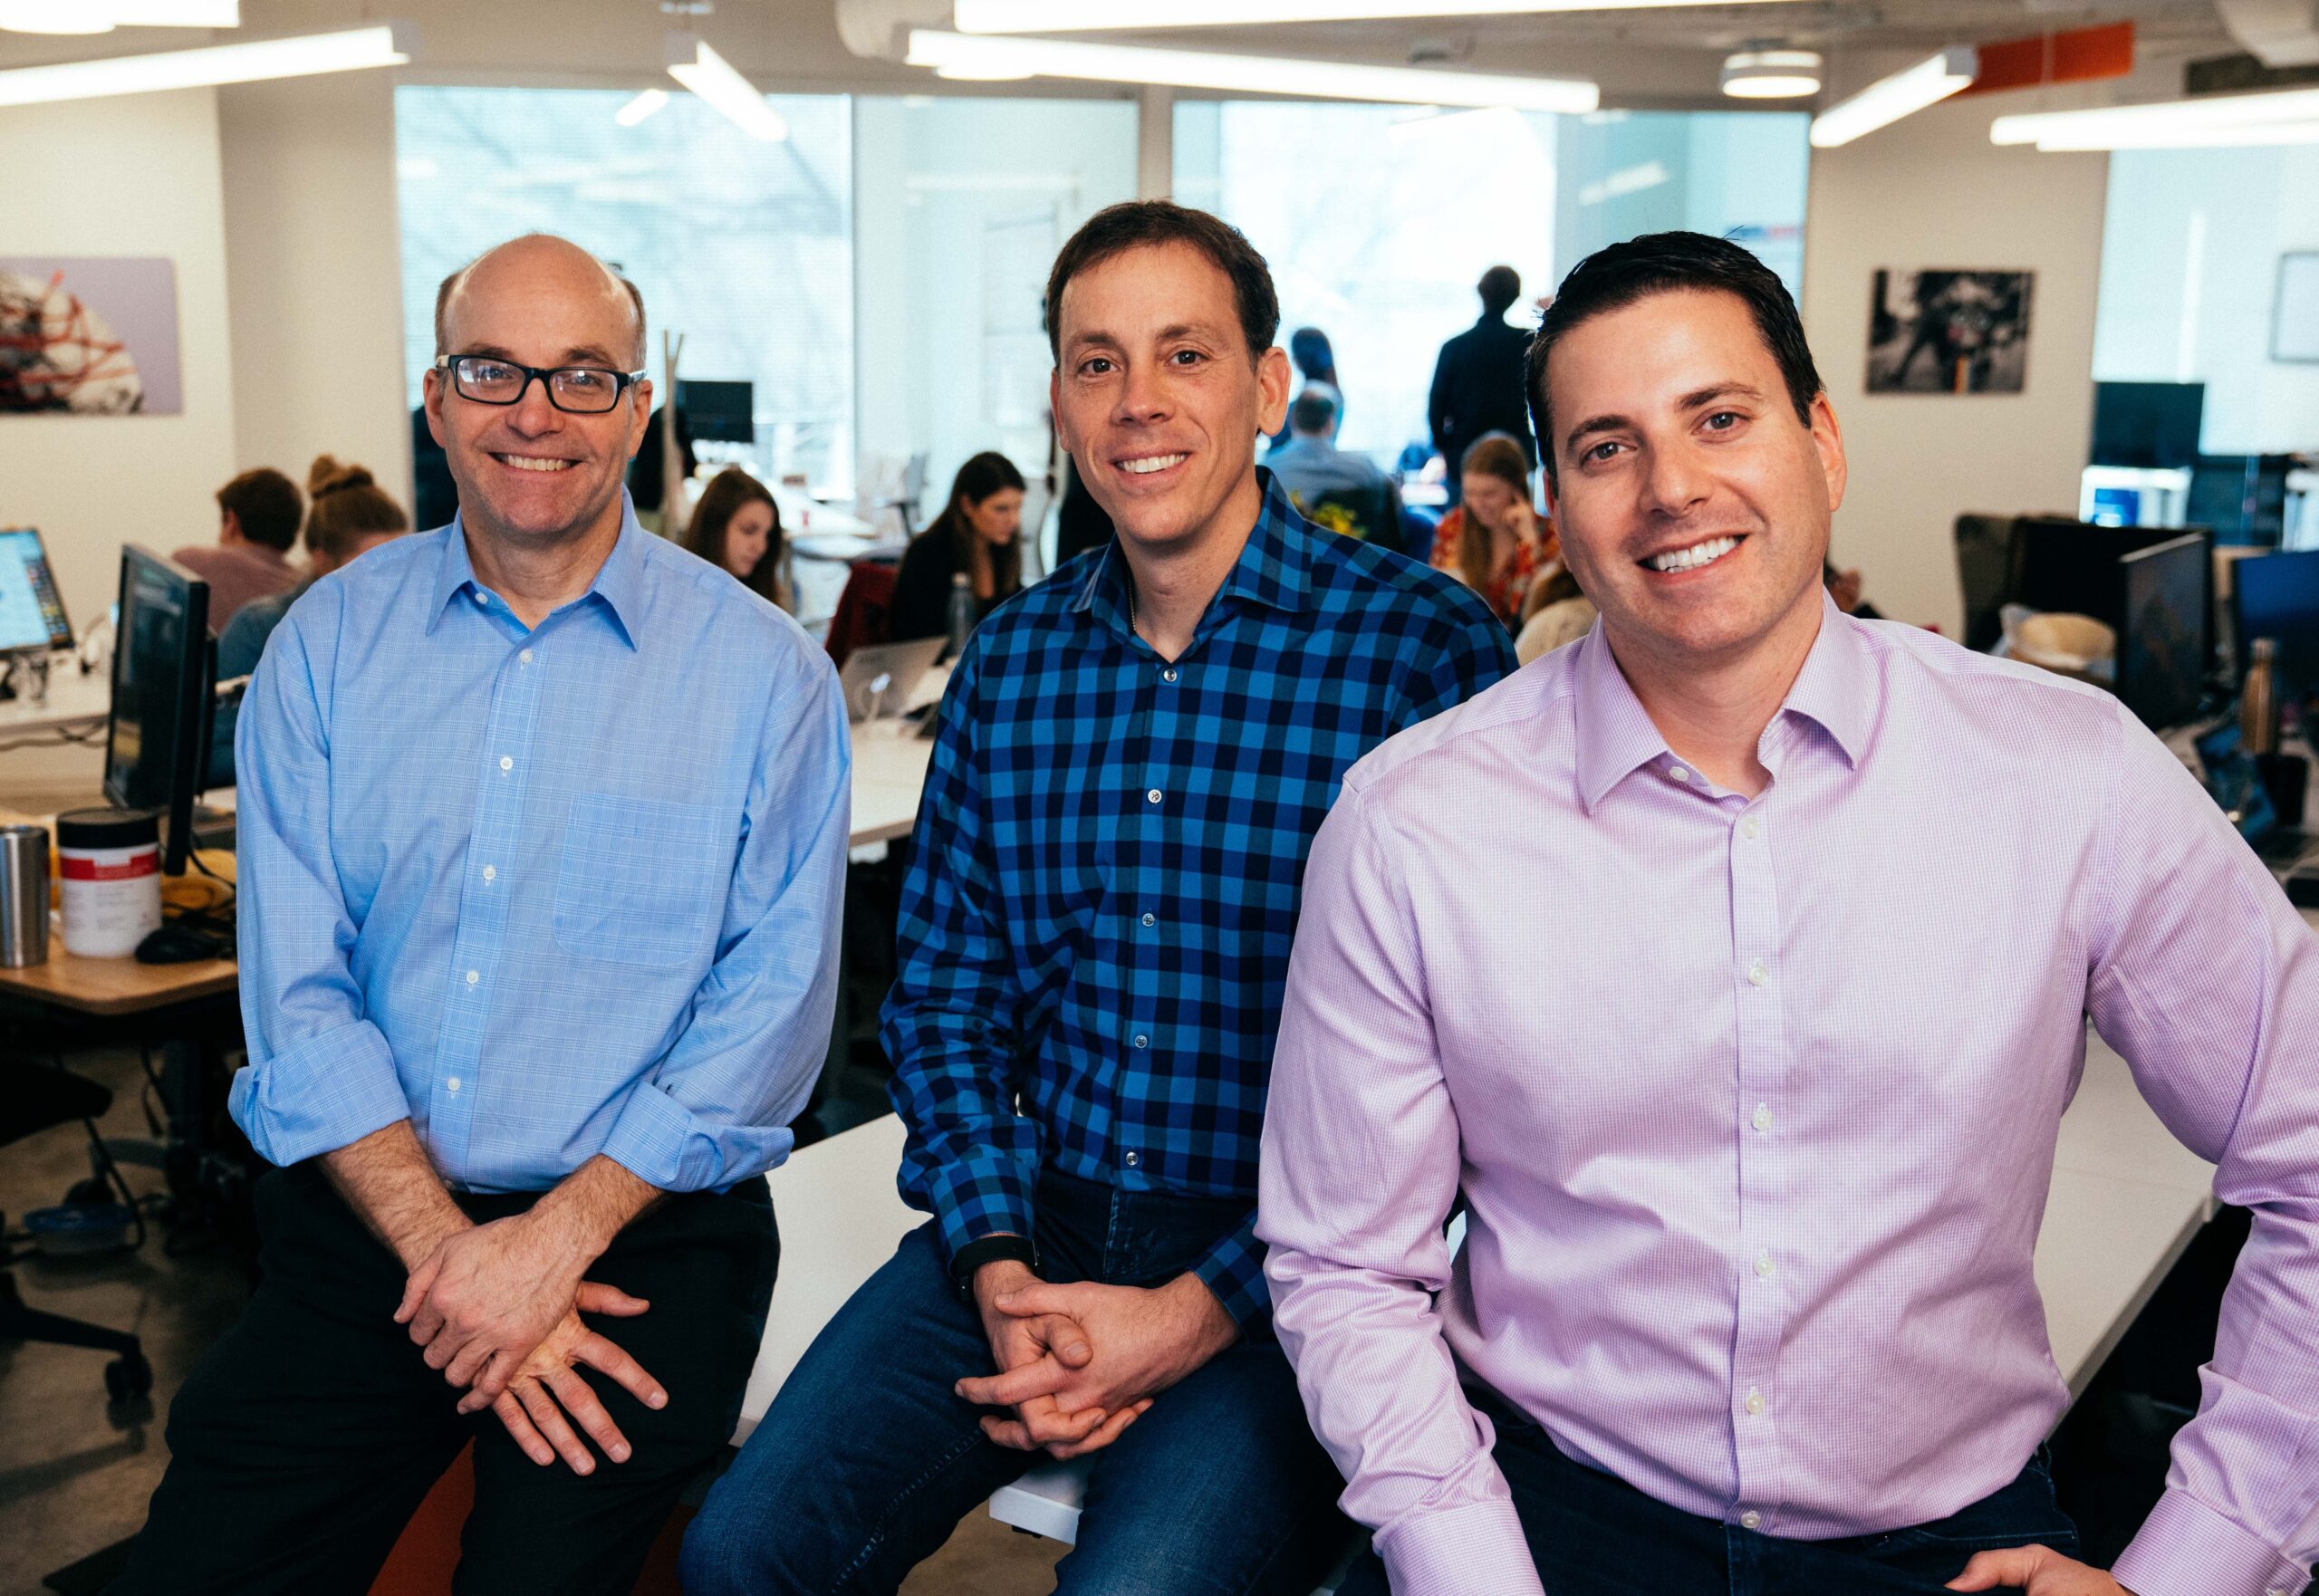 Axios co-founders from the left to right: Mike Allen, Jim VandeHei, and Roy Schwartz.